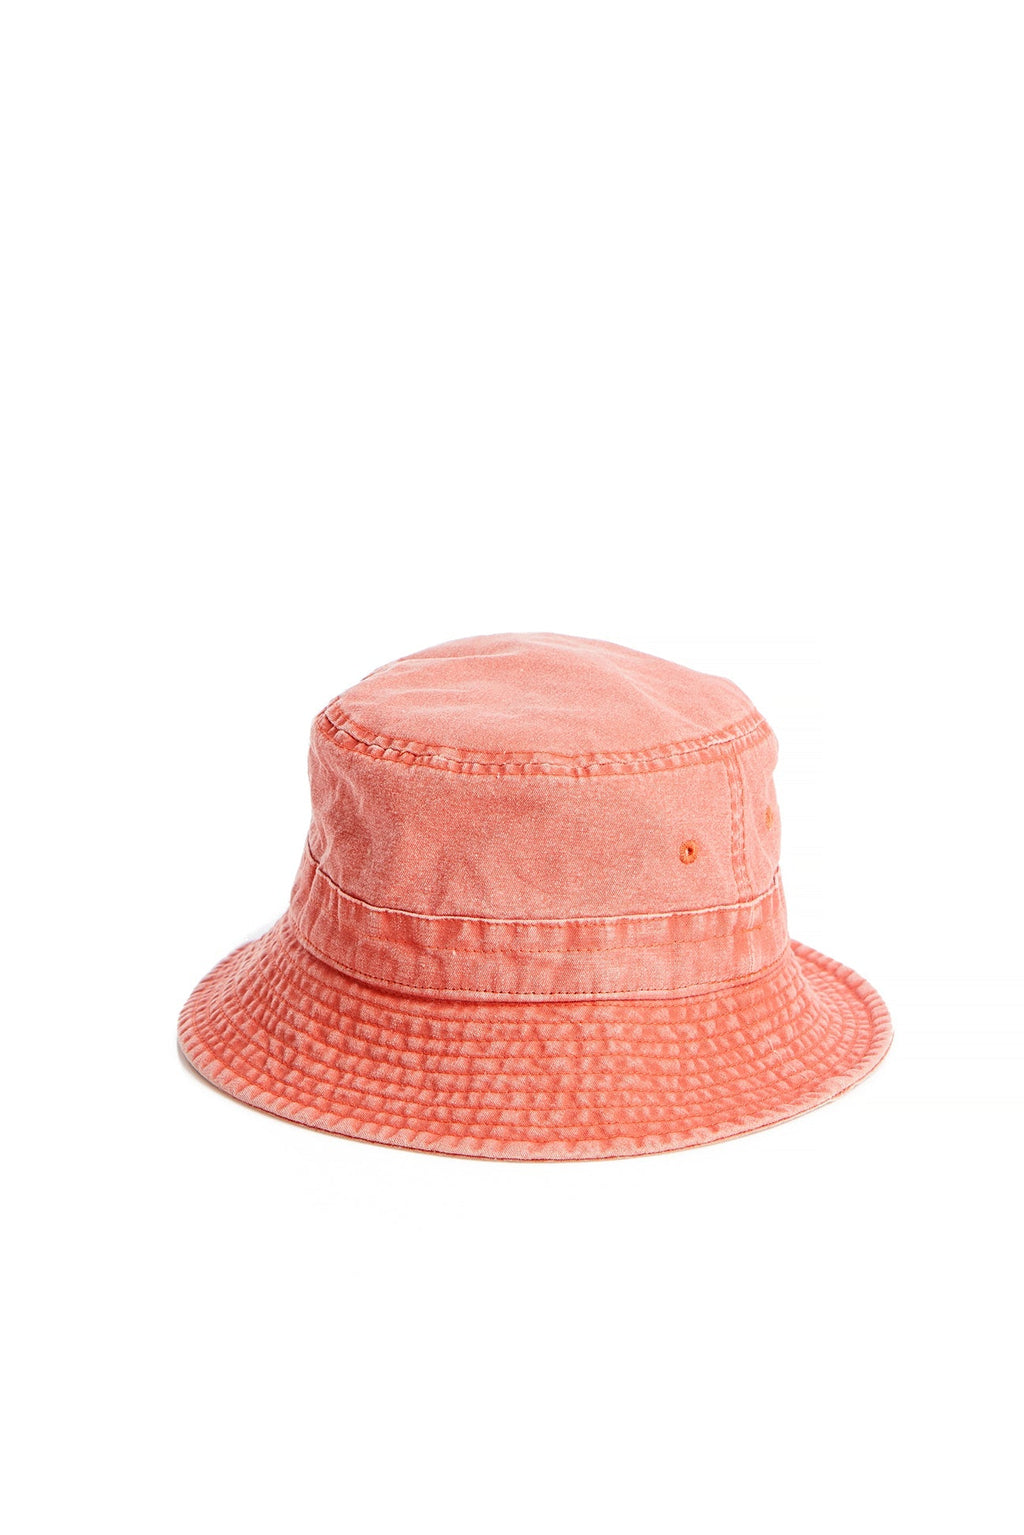 Murray's Toggery Shop Nantucket Red Bucket Hat MENS ACCESSORIES ...